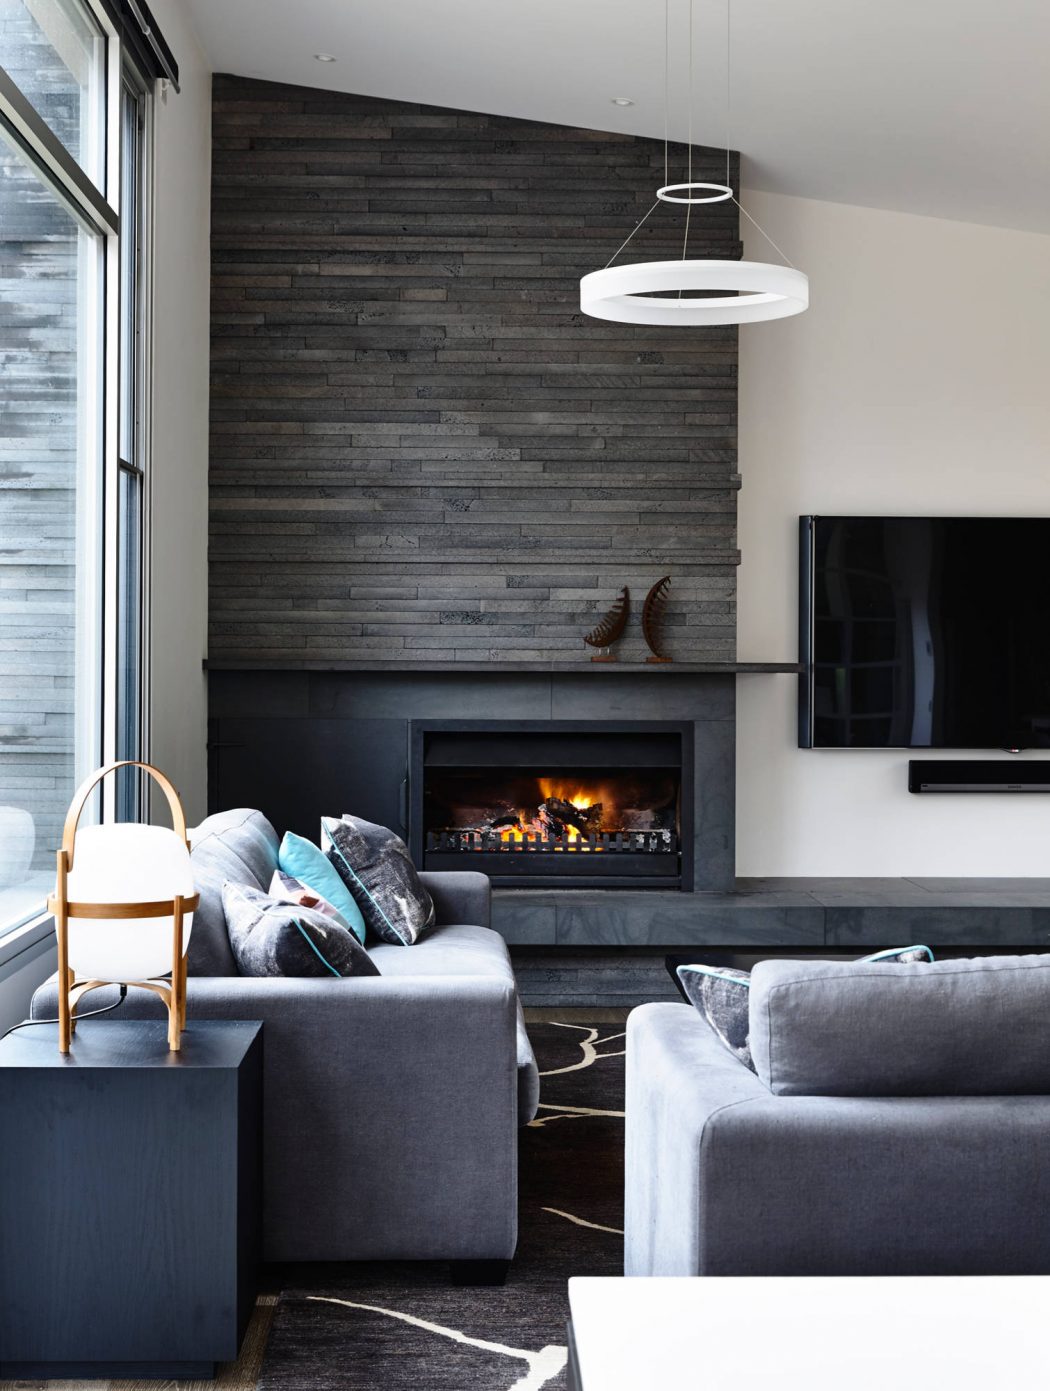 Cozy living room with sleek, modern design featuring dark wood accent wall and fireplace.